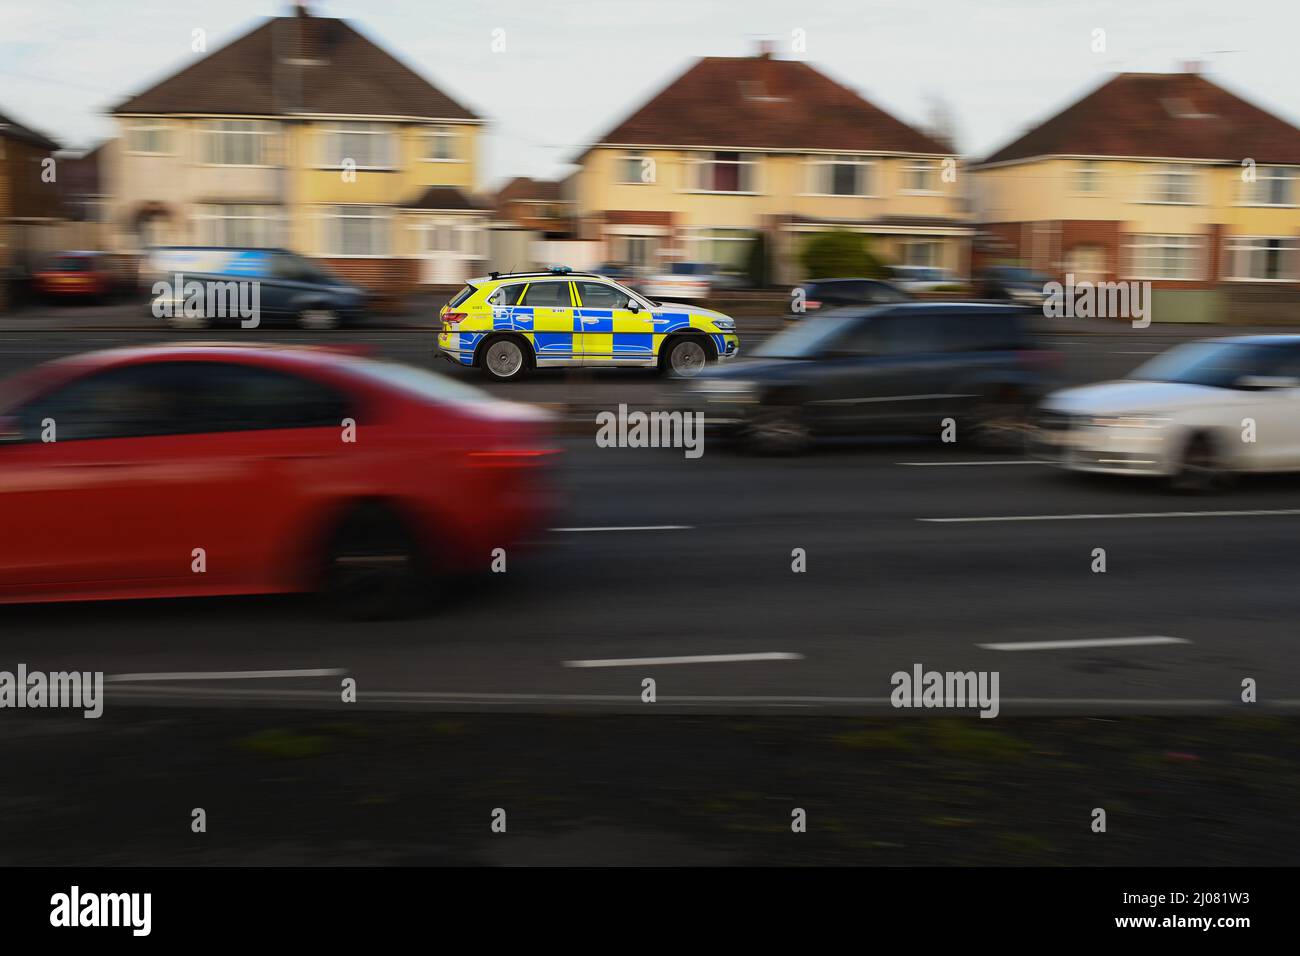 Hampshire police car SUV VW Tiguan driving along the road panned with movement on the way to an emergency call with blue lights with copy space. Stock Photo